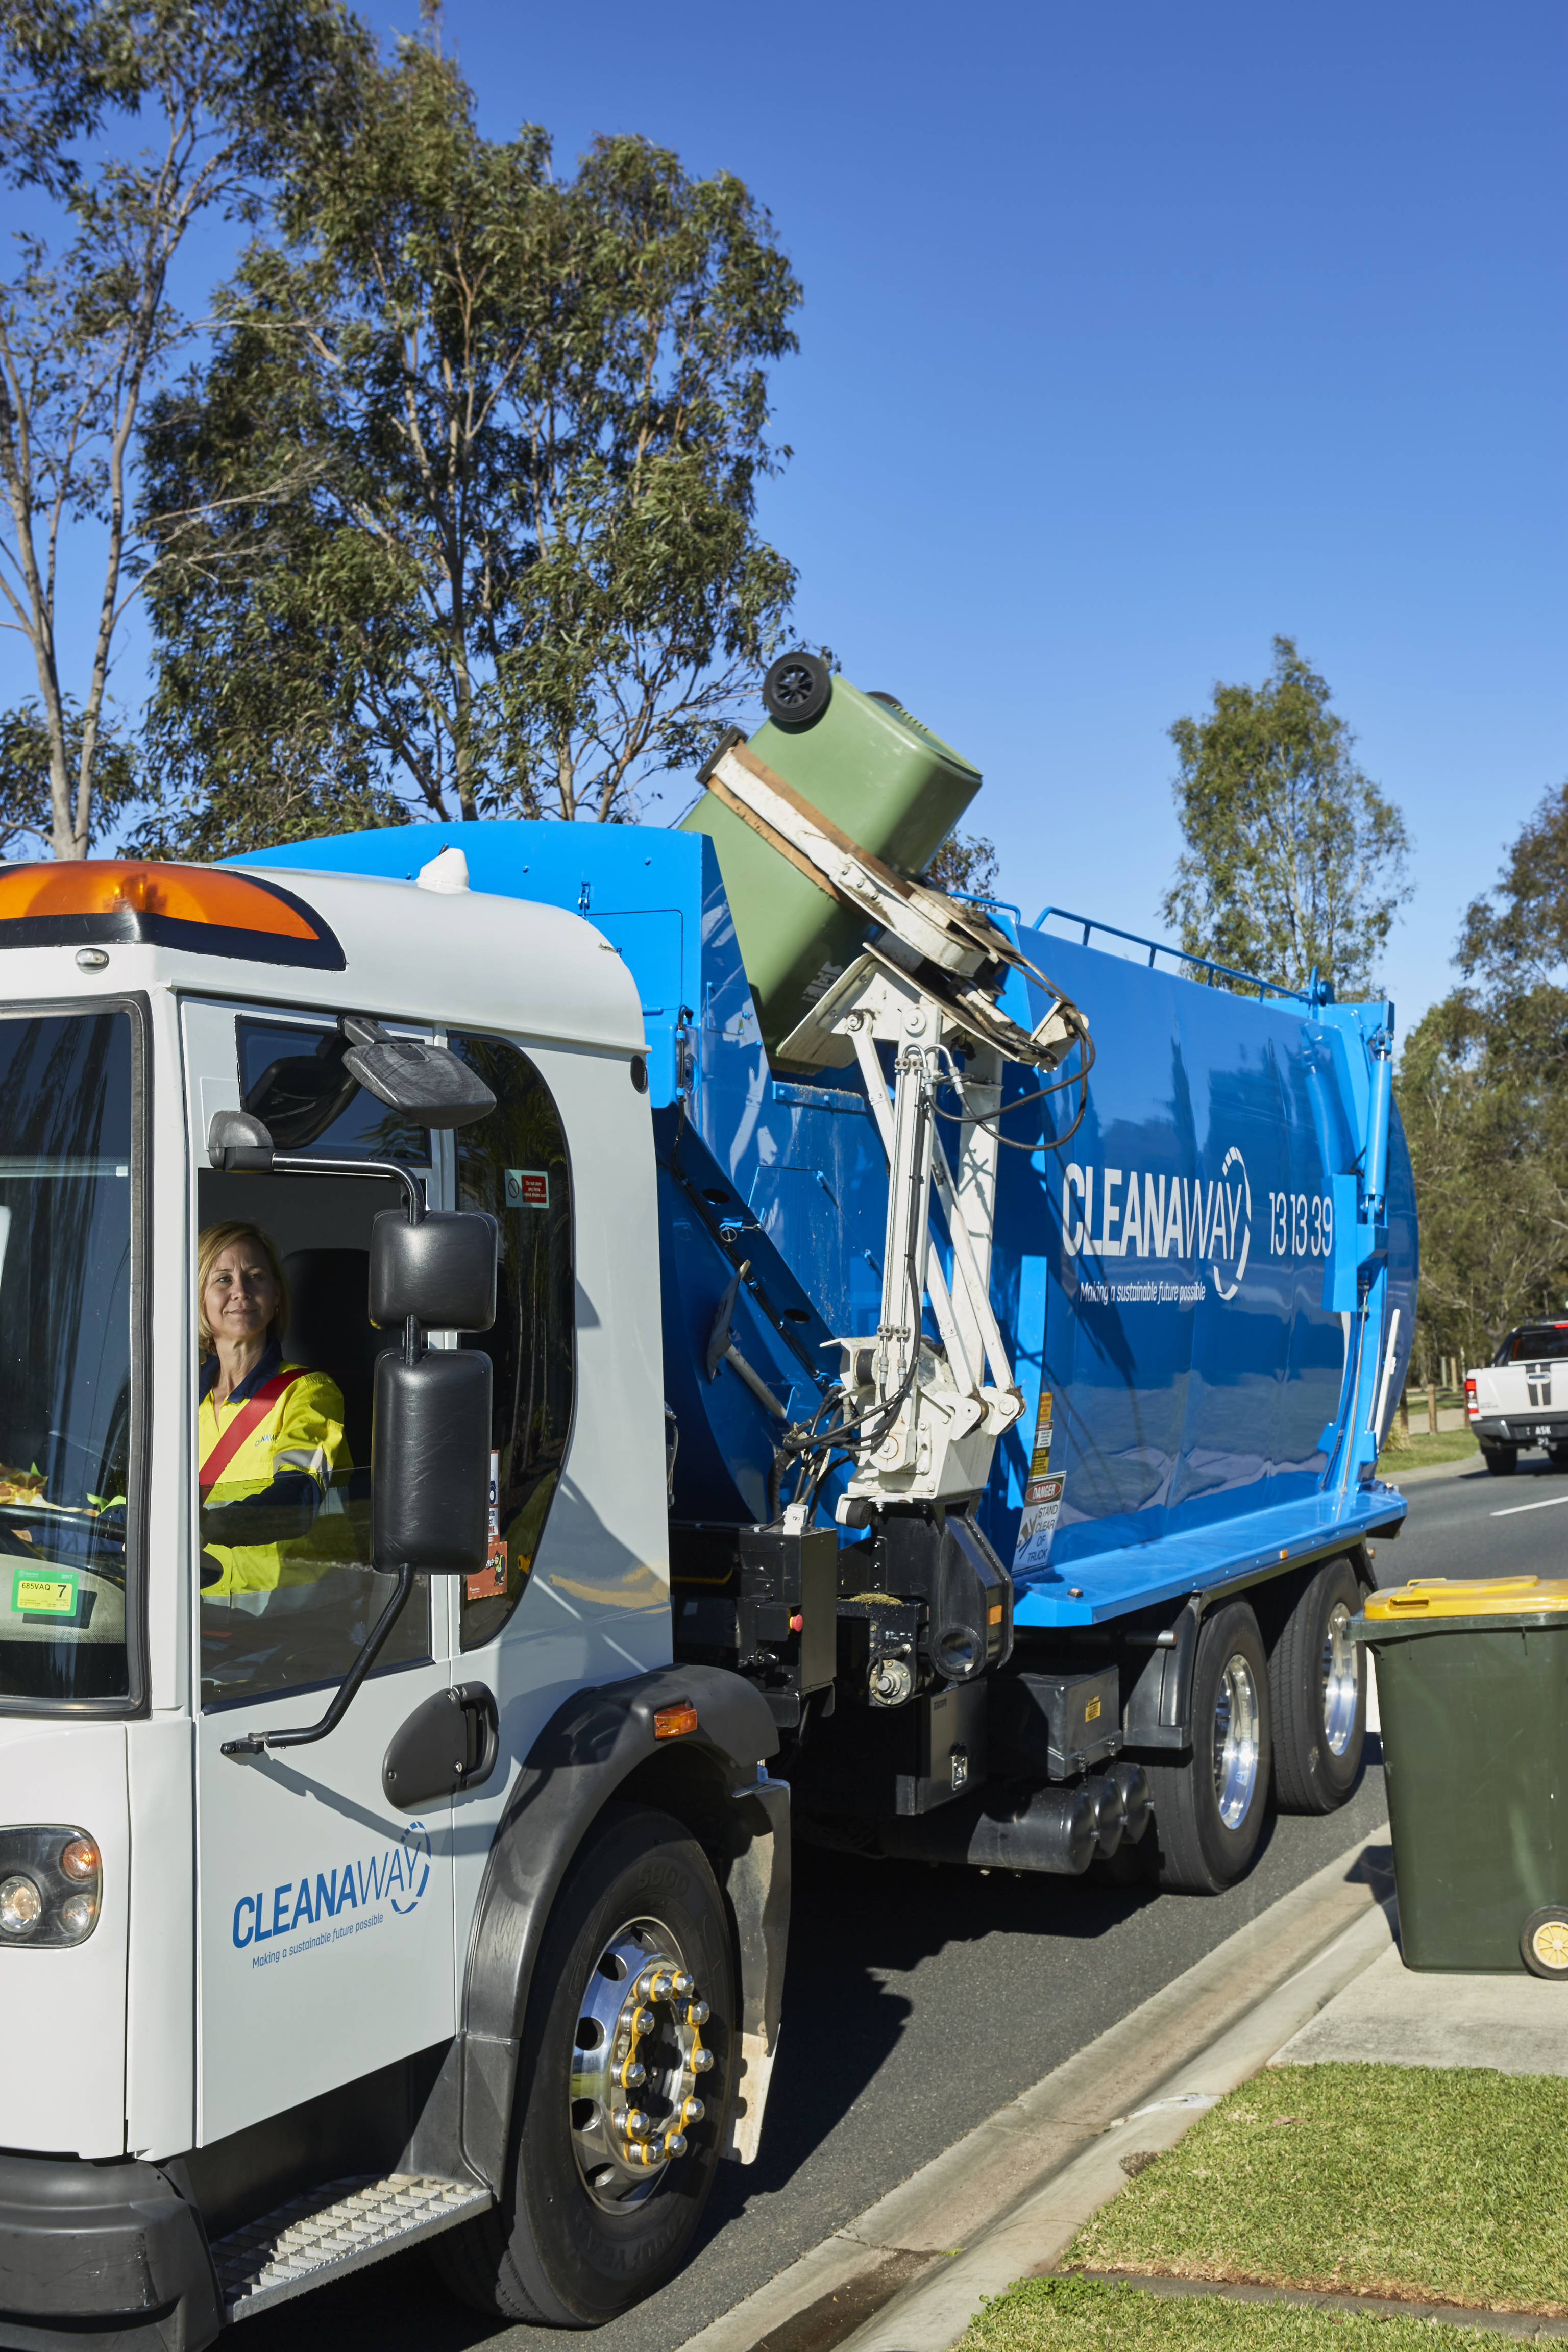 This is a picture of a garbage truck collecting a residential bin